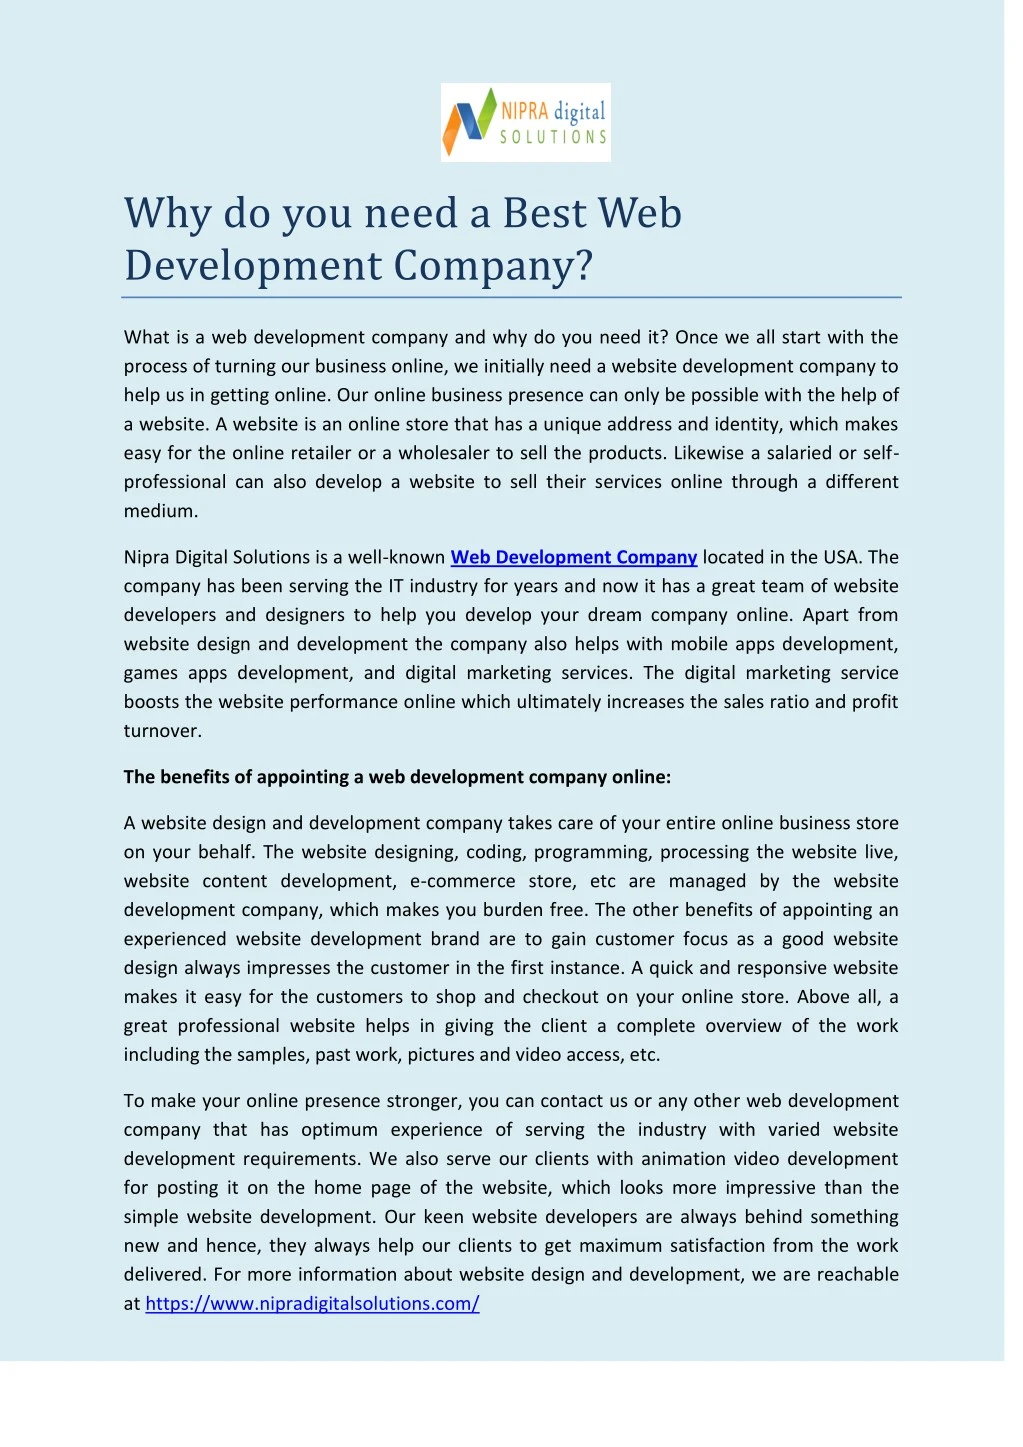 why do you need a best web development company